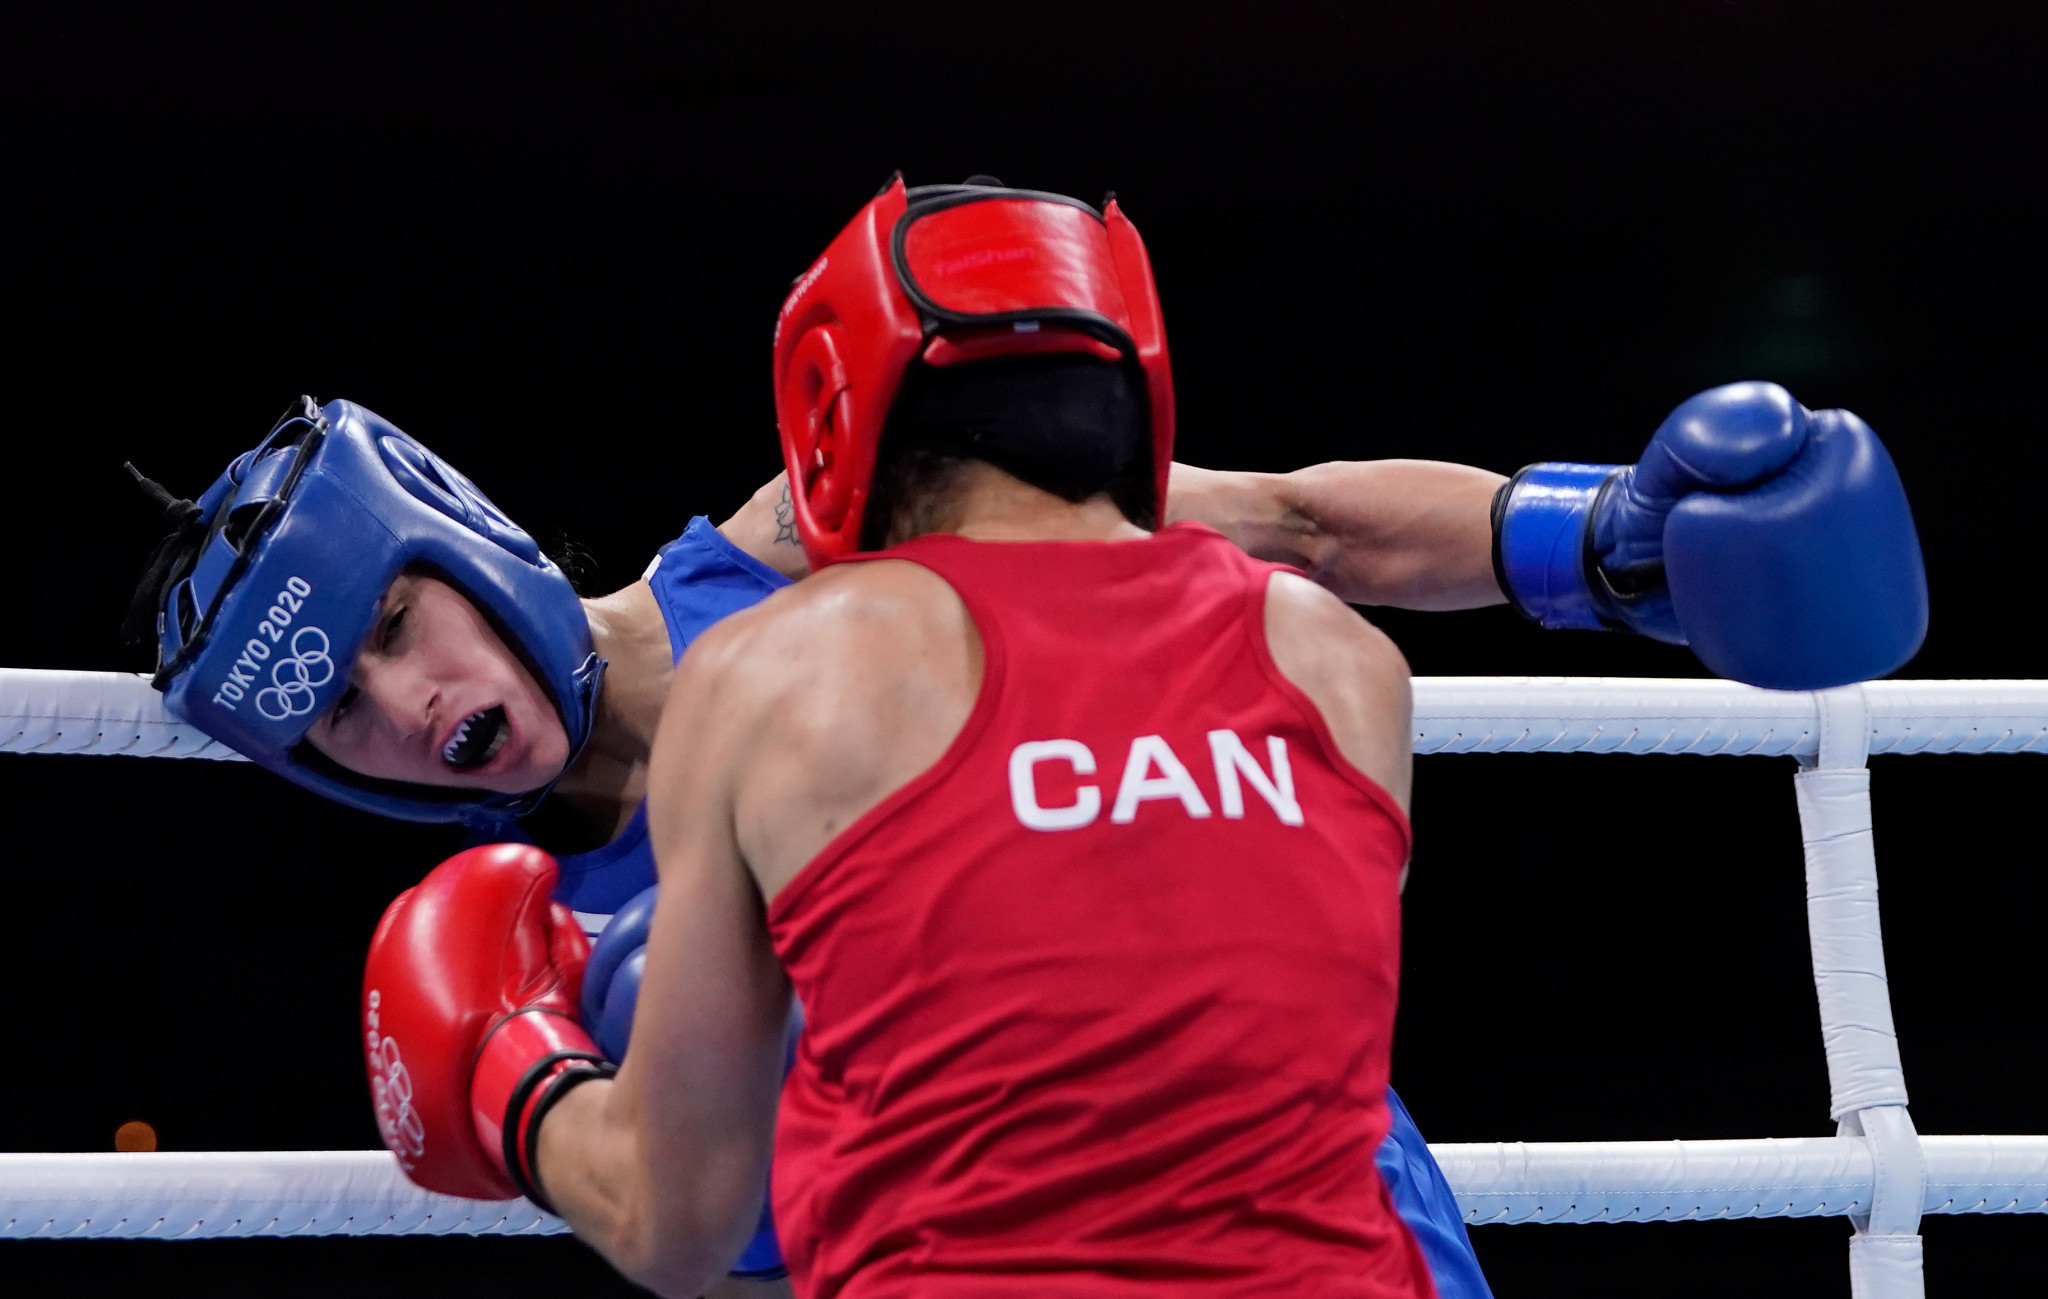 Boxing Canada is one of several national governing bodies in the country facing a safeguarding crisis ©Getty Images